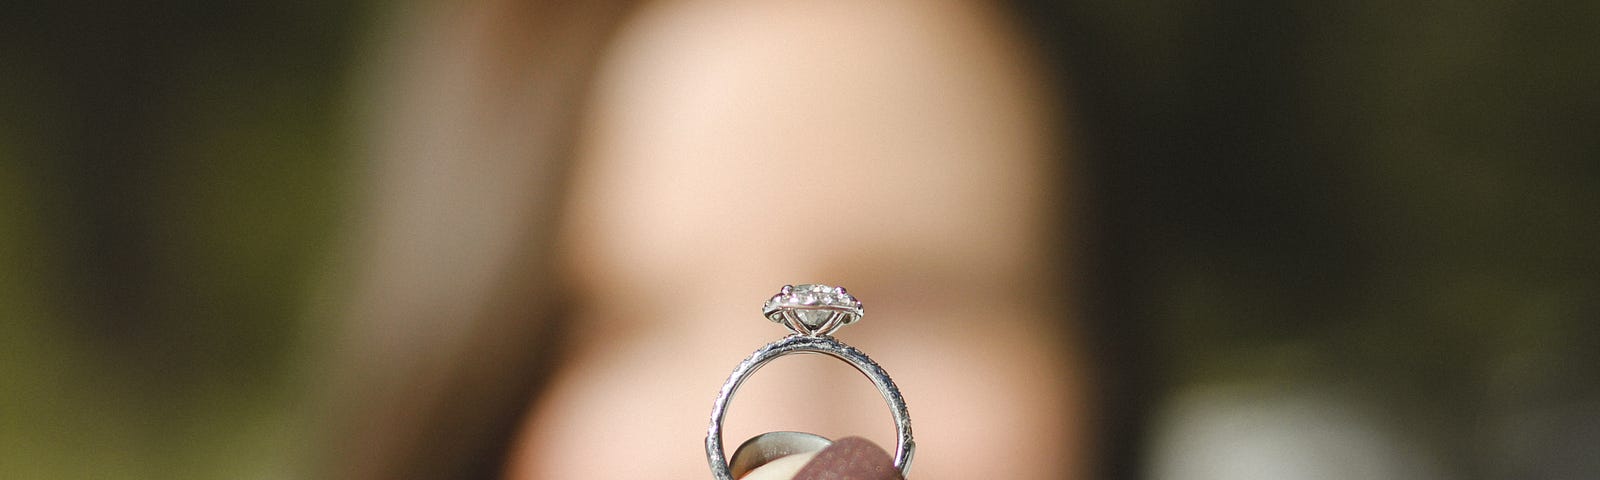 woman holding a wedding ring in the foreground